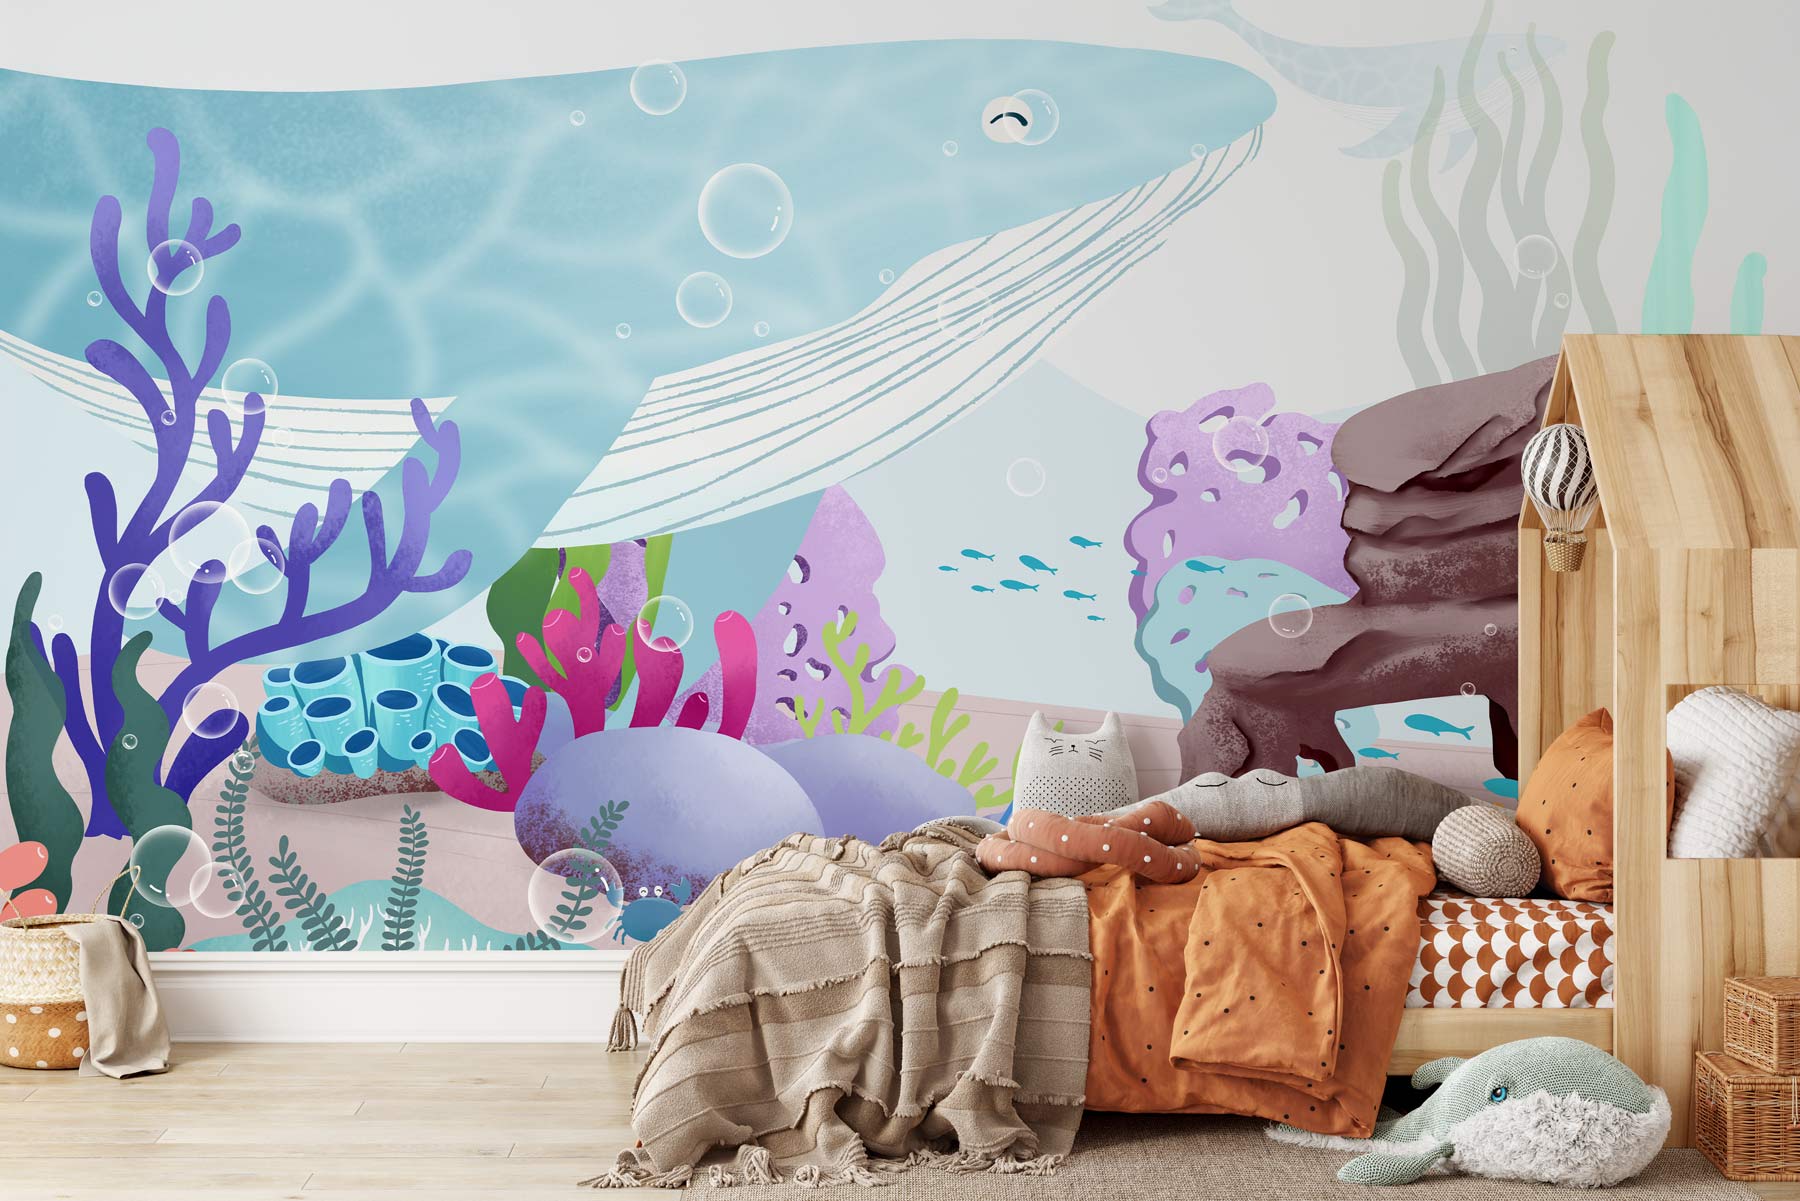 Wallpaper Mural of Seabed Animals for Use in Decorating Bedrooms